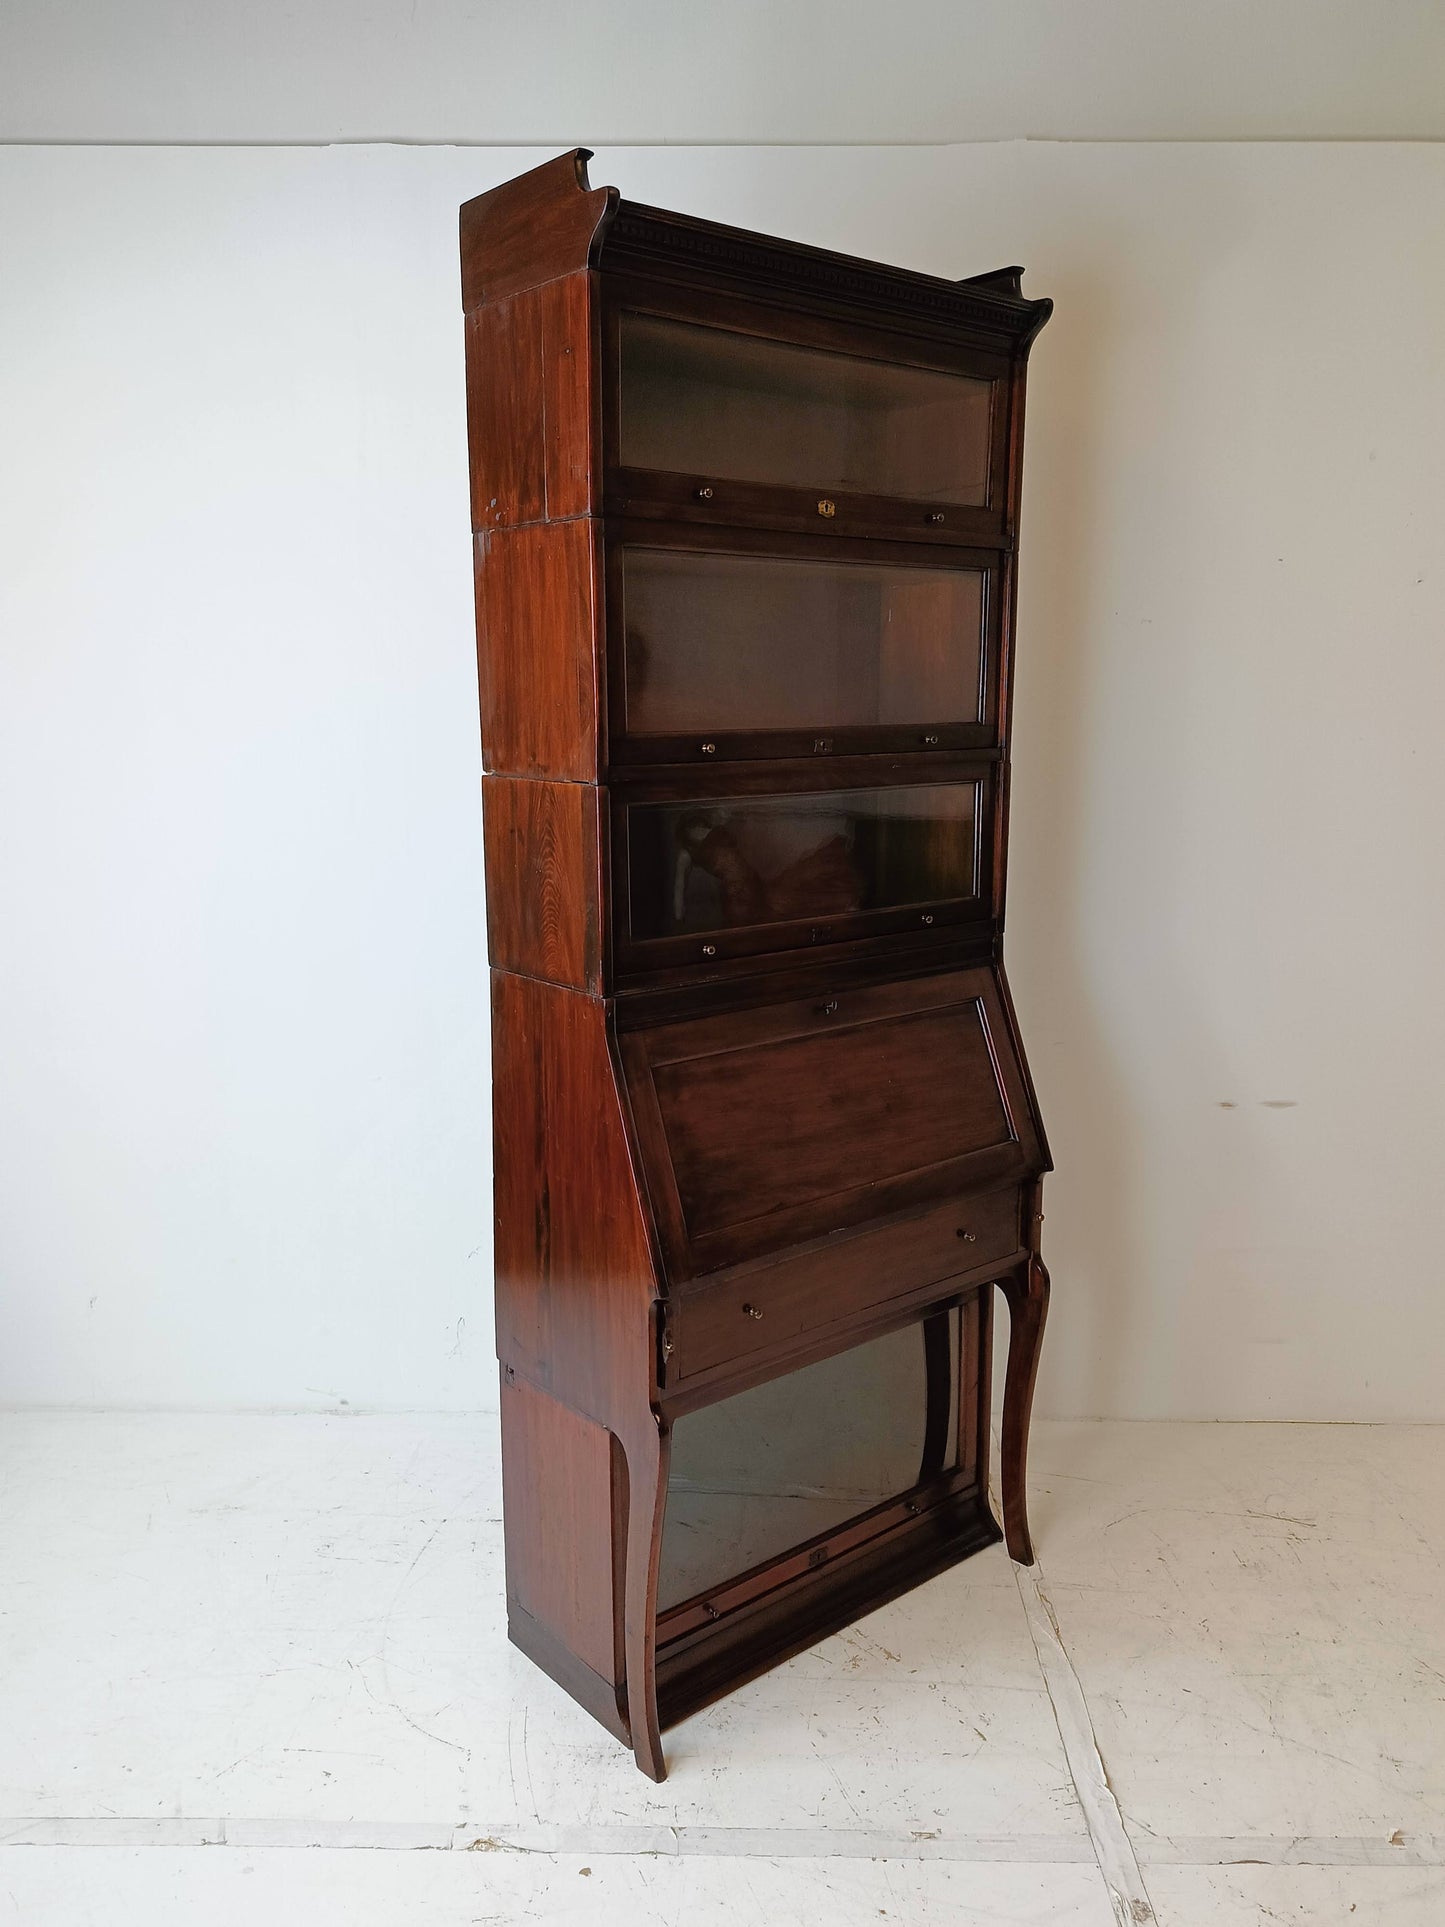 Globe Wernicke Style Bookcase/Display Cabinet With Secretary Table Maker Lubus